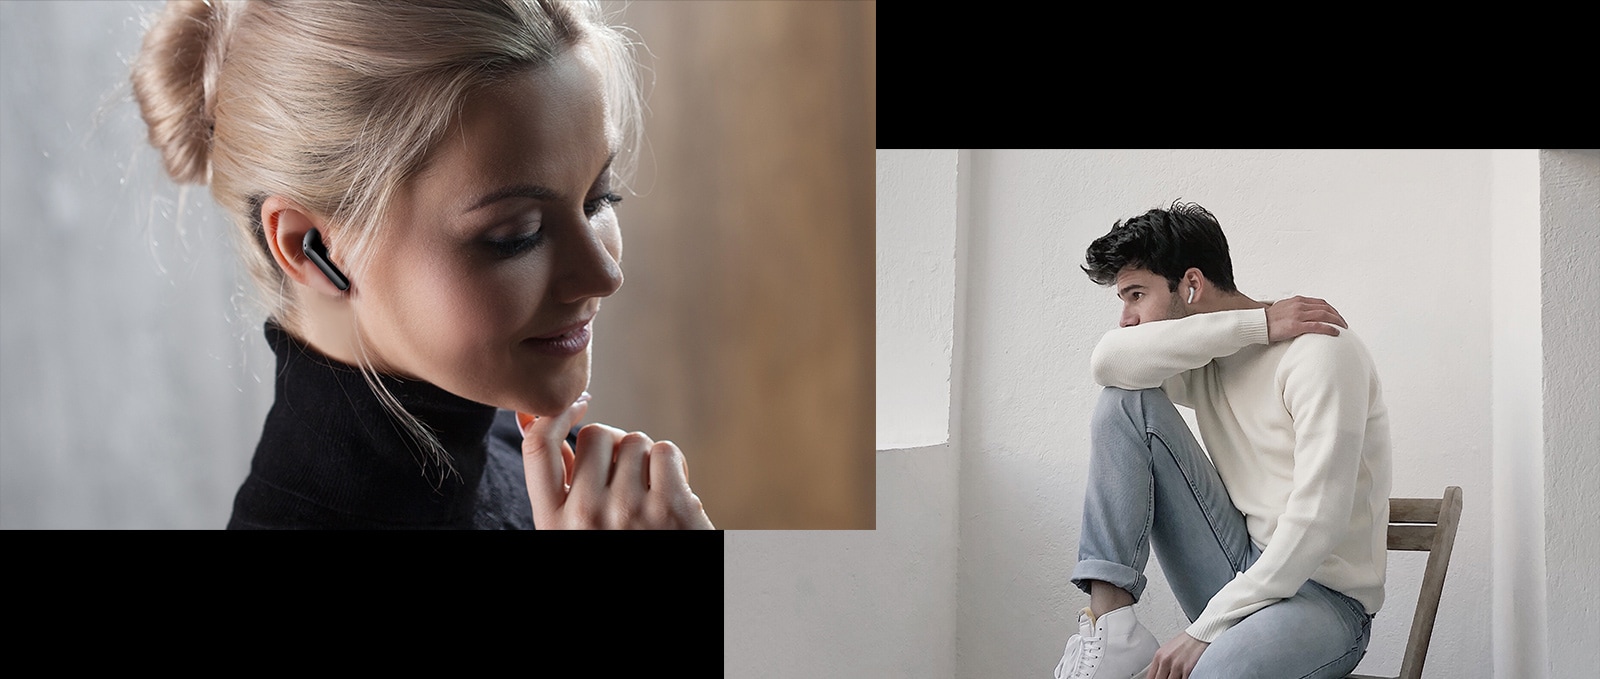 Images of a woman wearing a black earbud and a man wearing a white earbud with sleek and minimal design